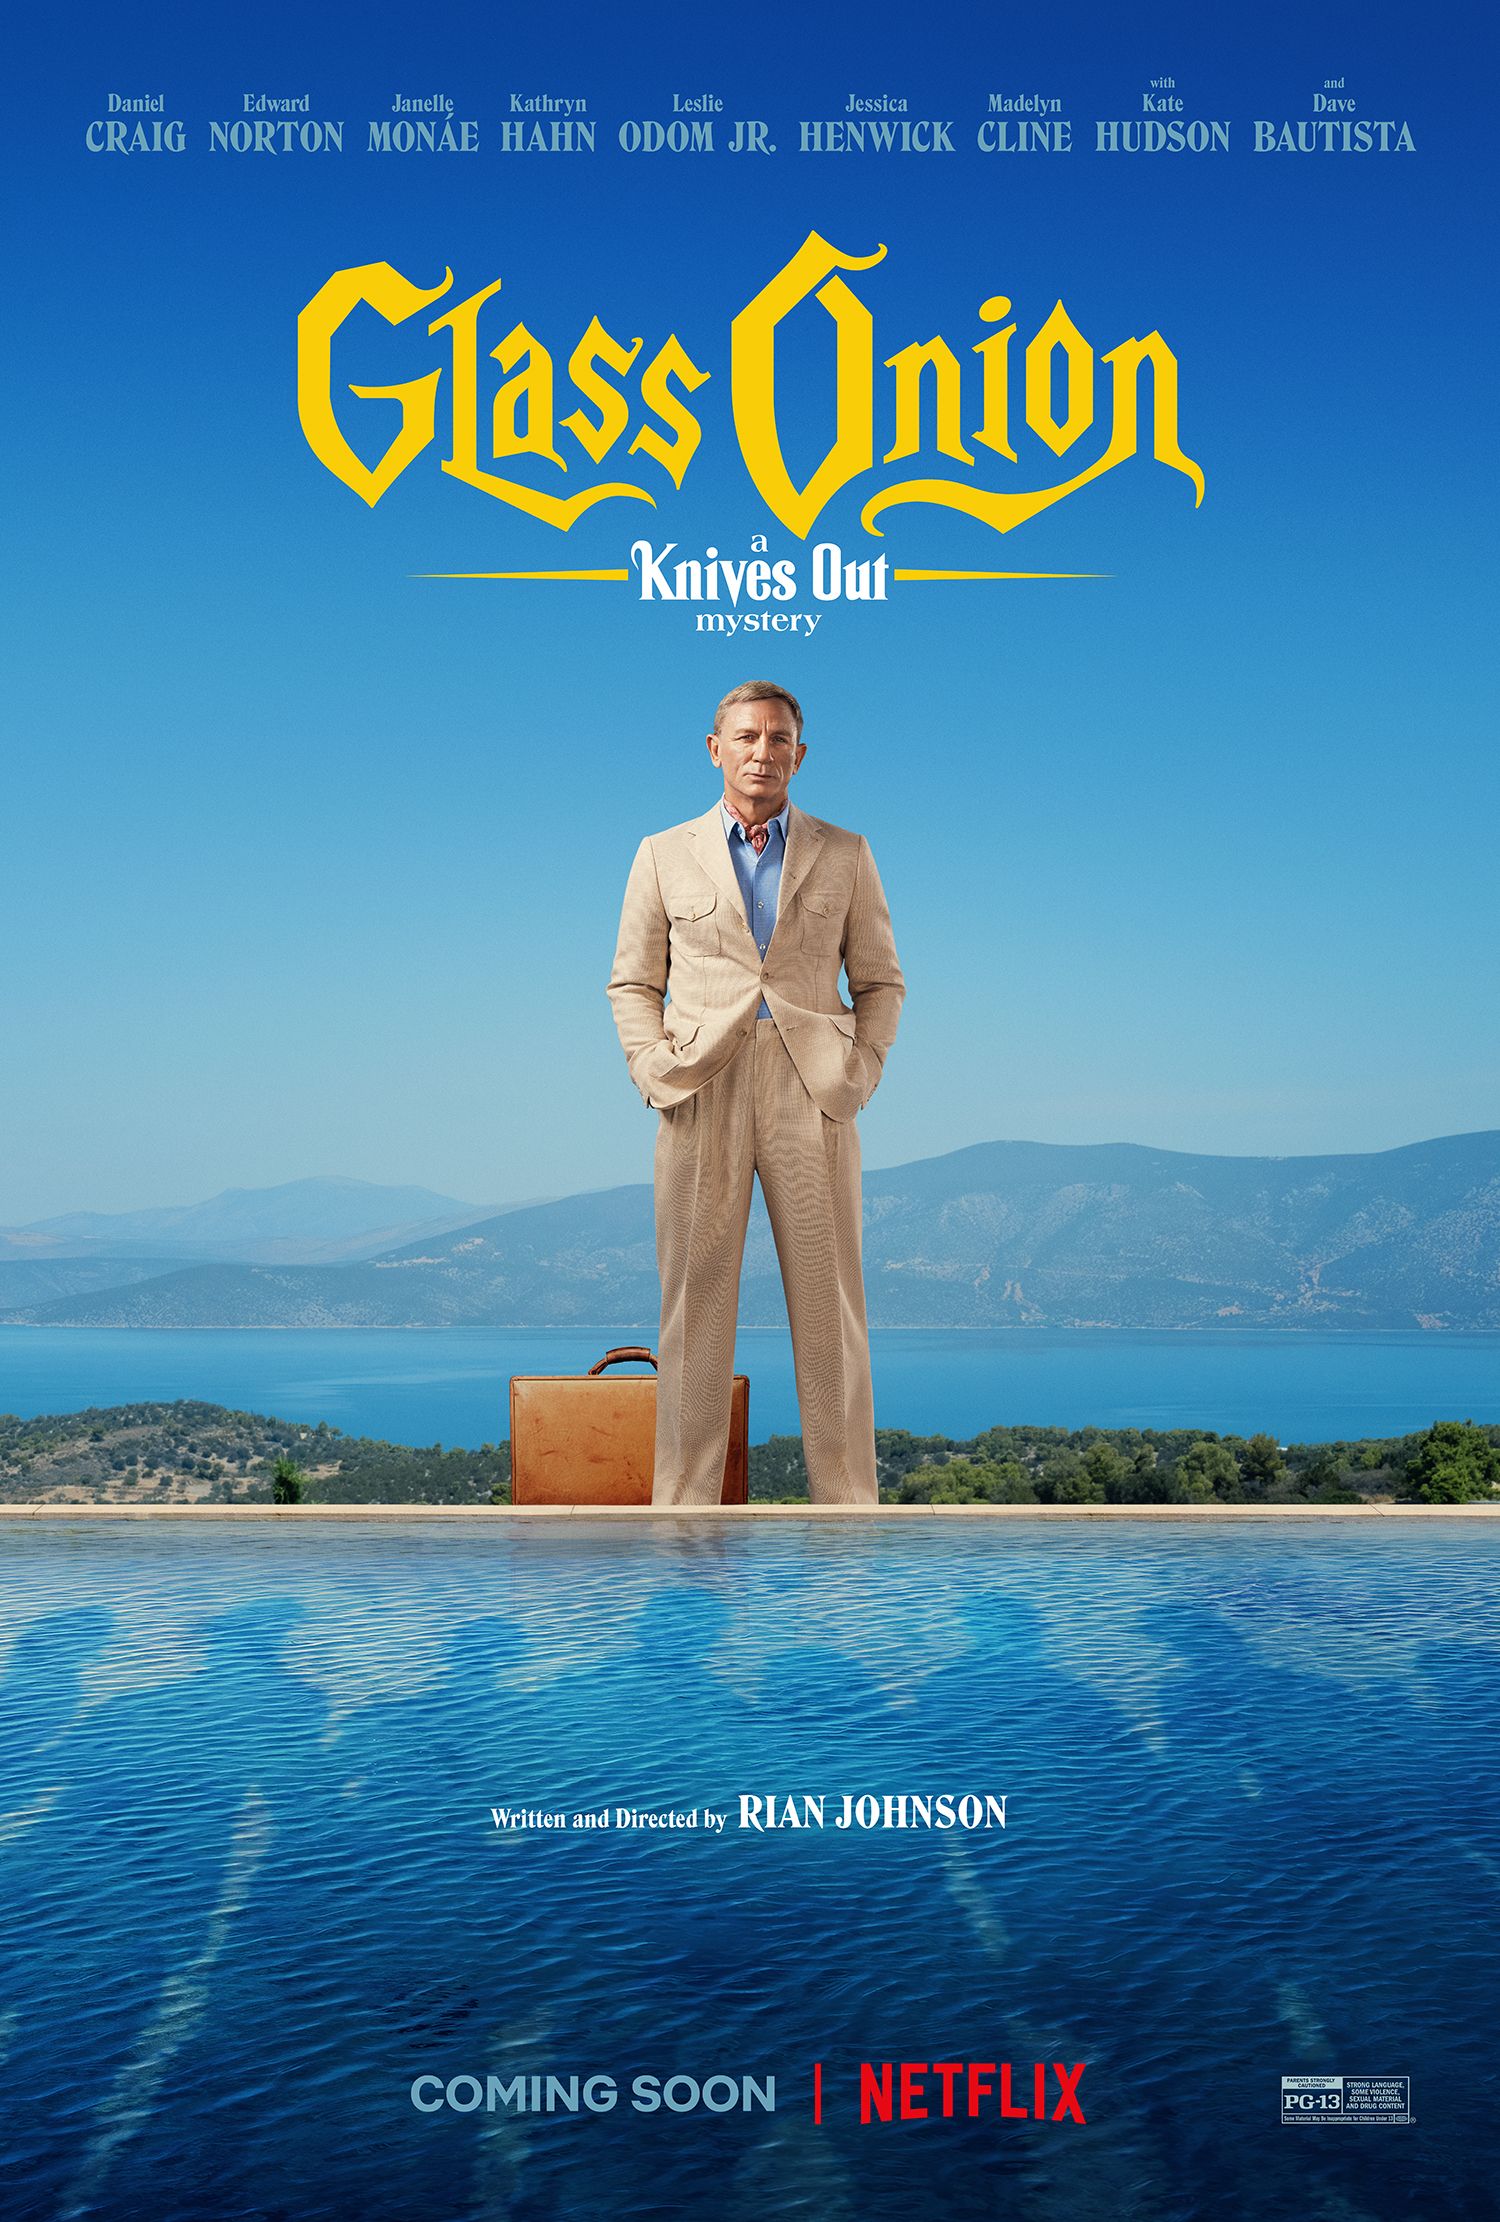 glass onion movie review new york times